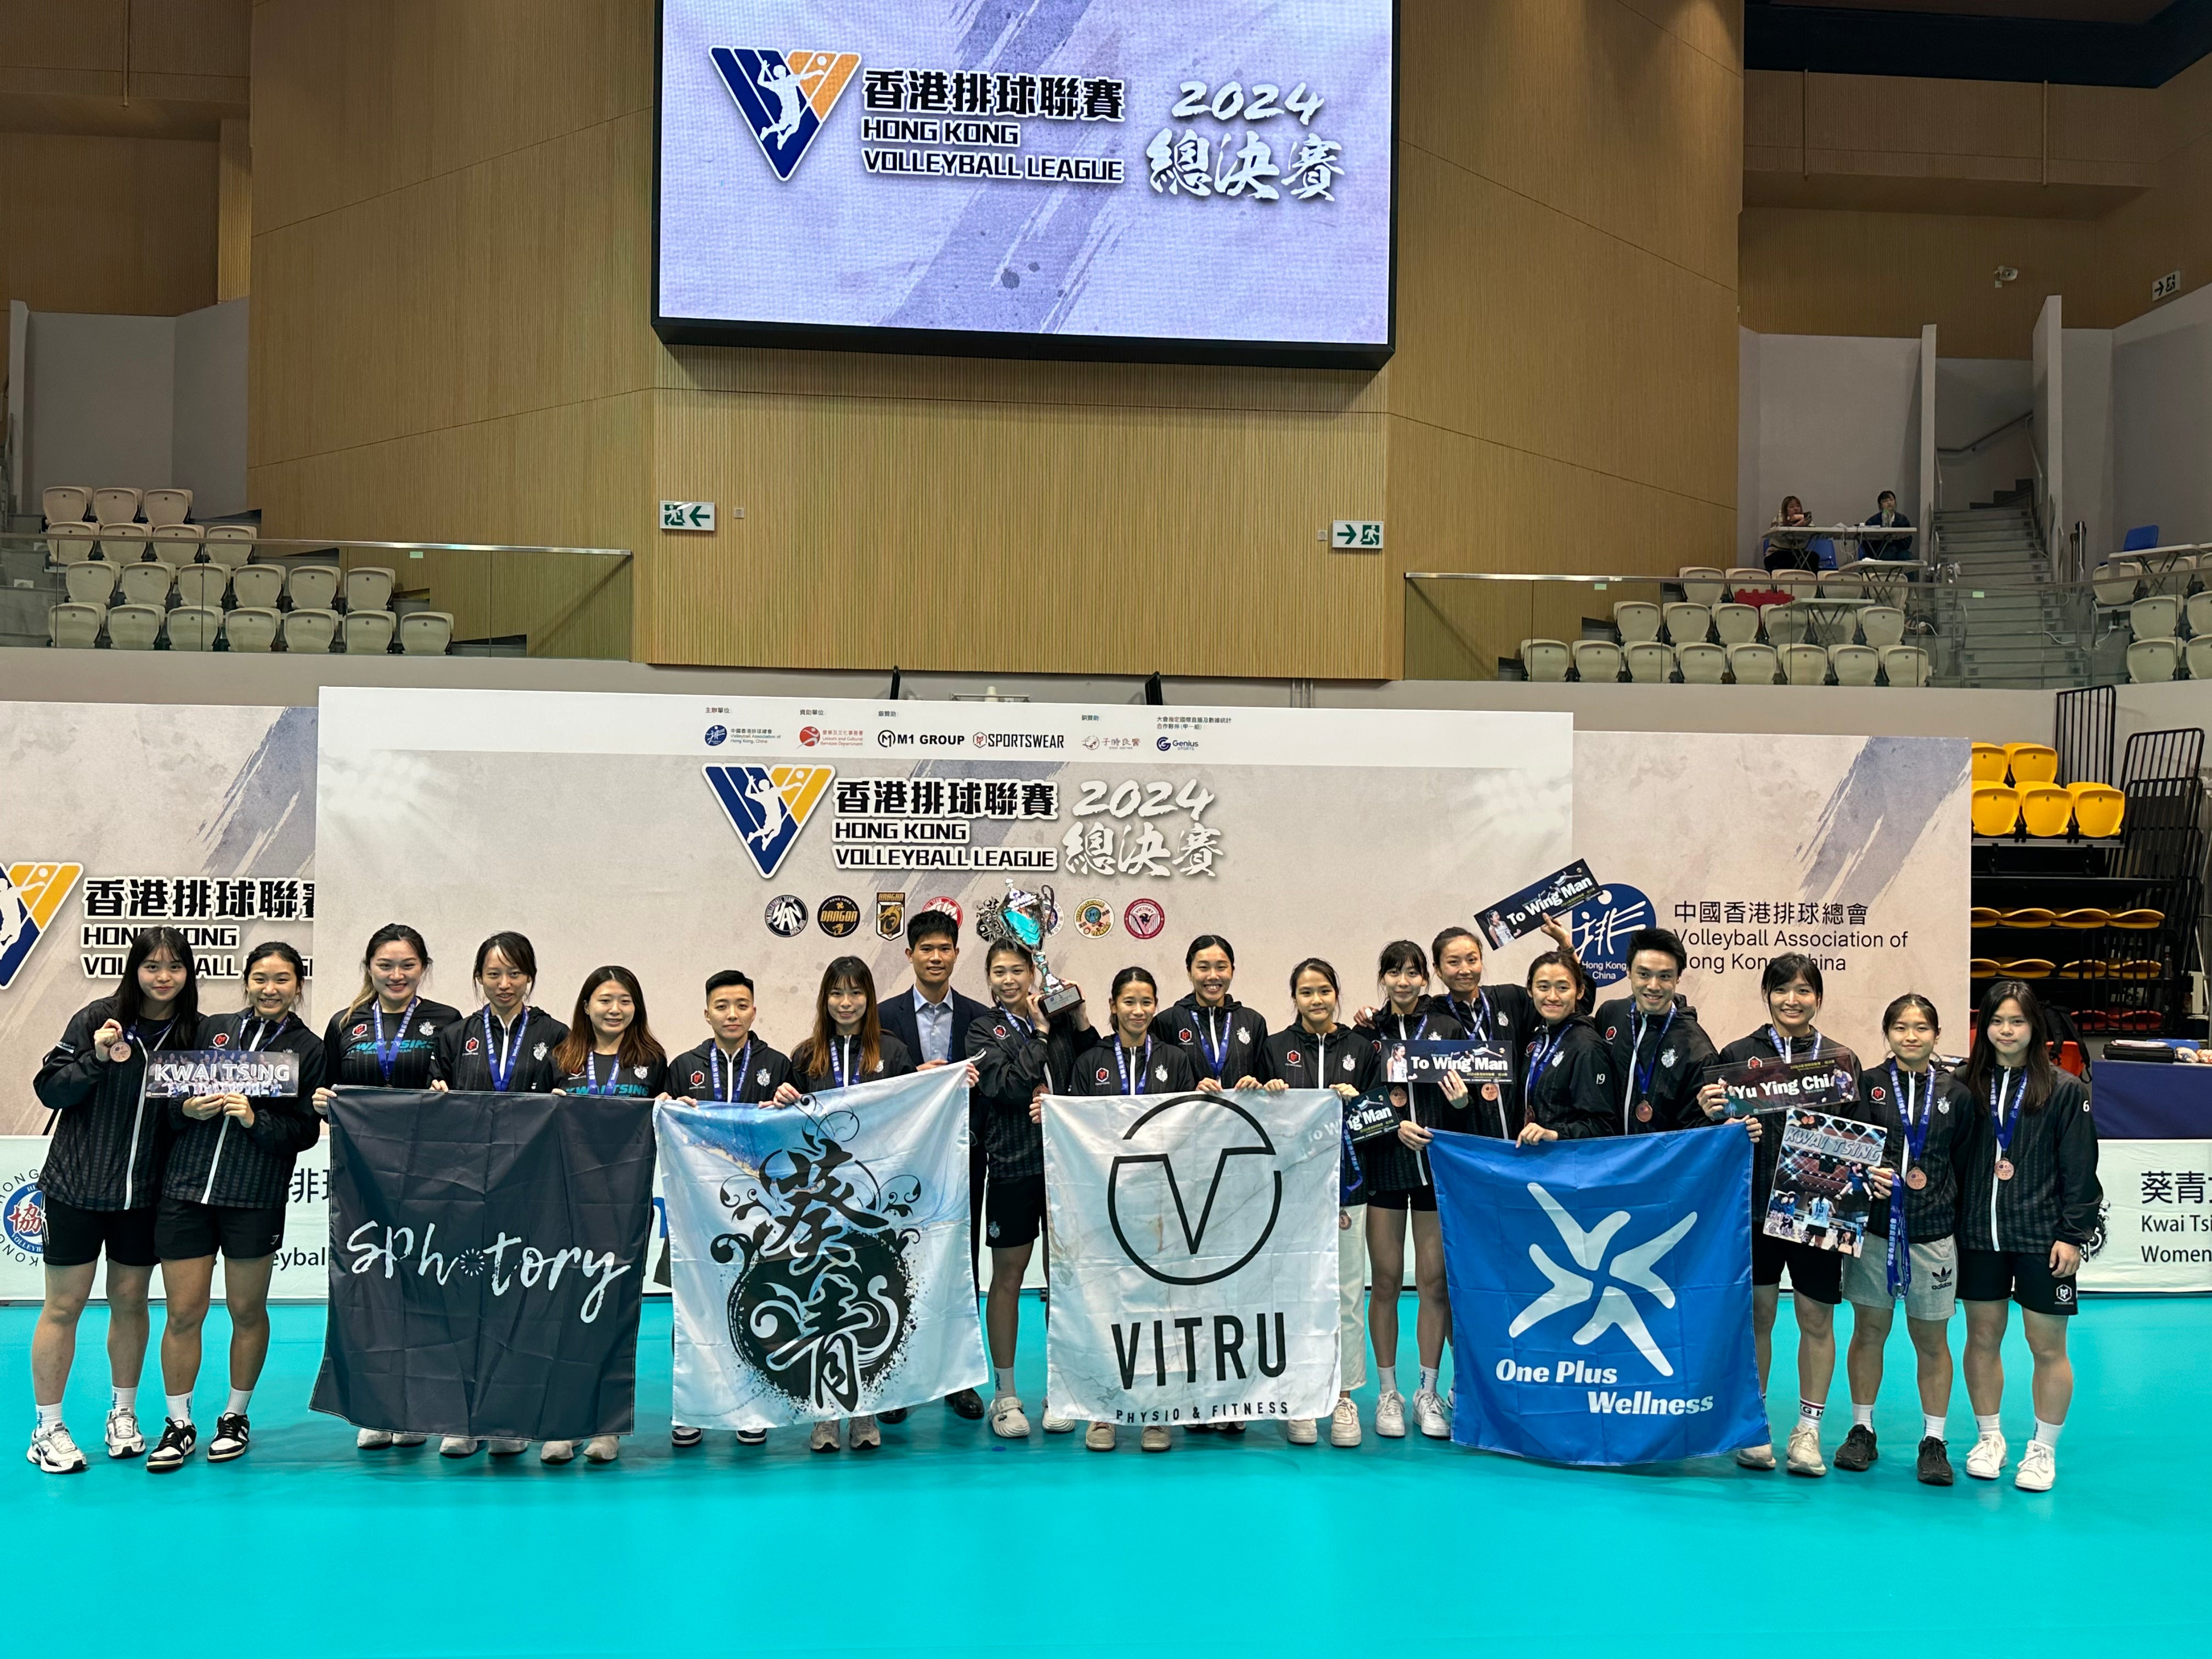 We got your back! Kwai Tsing Women’s Volleyball Team